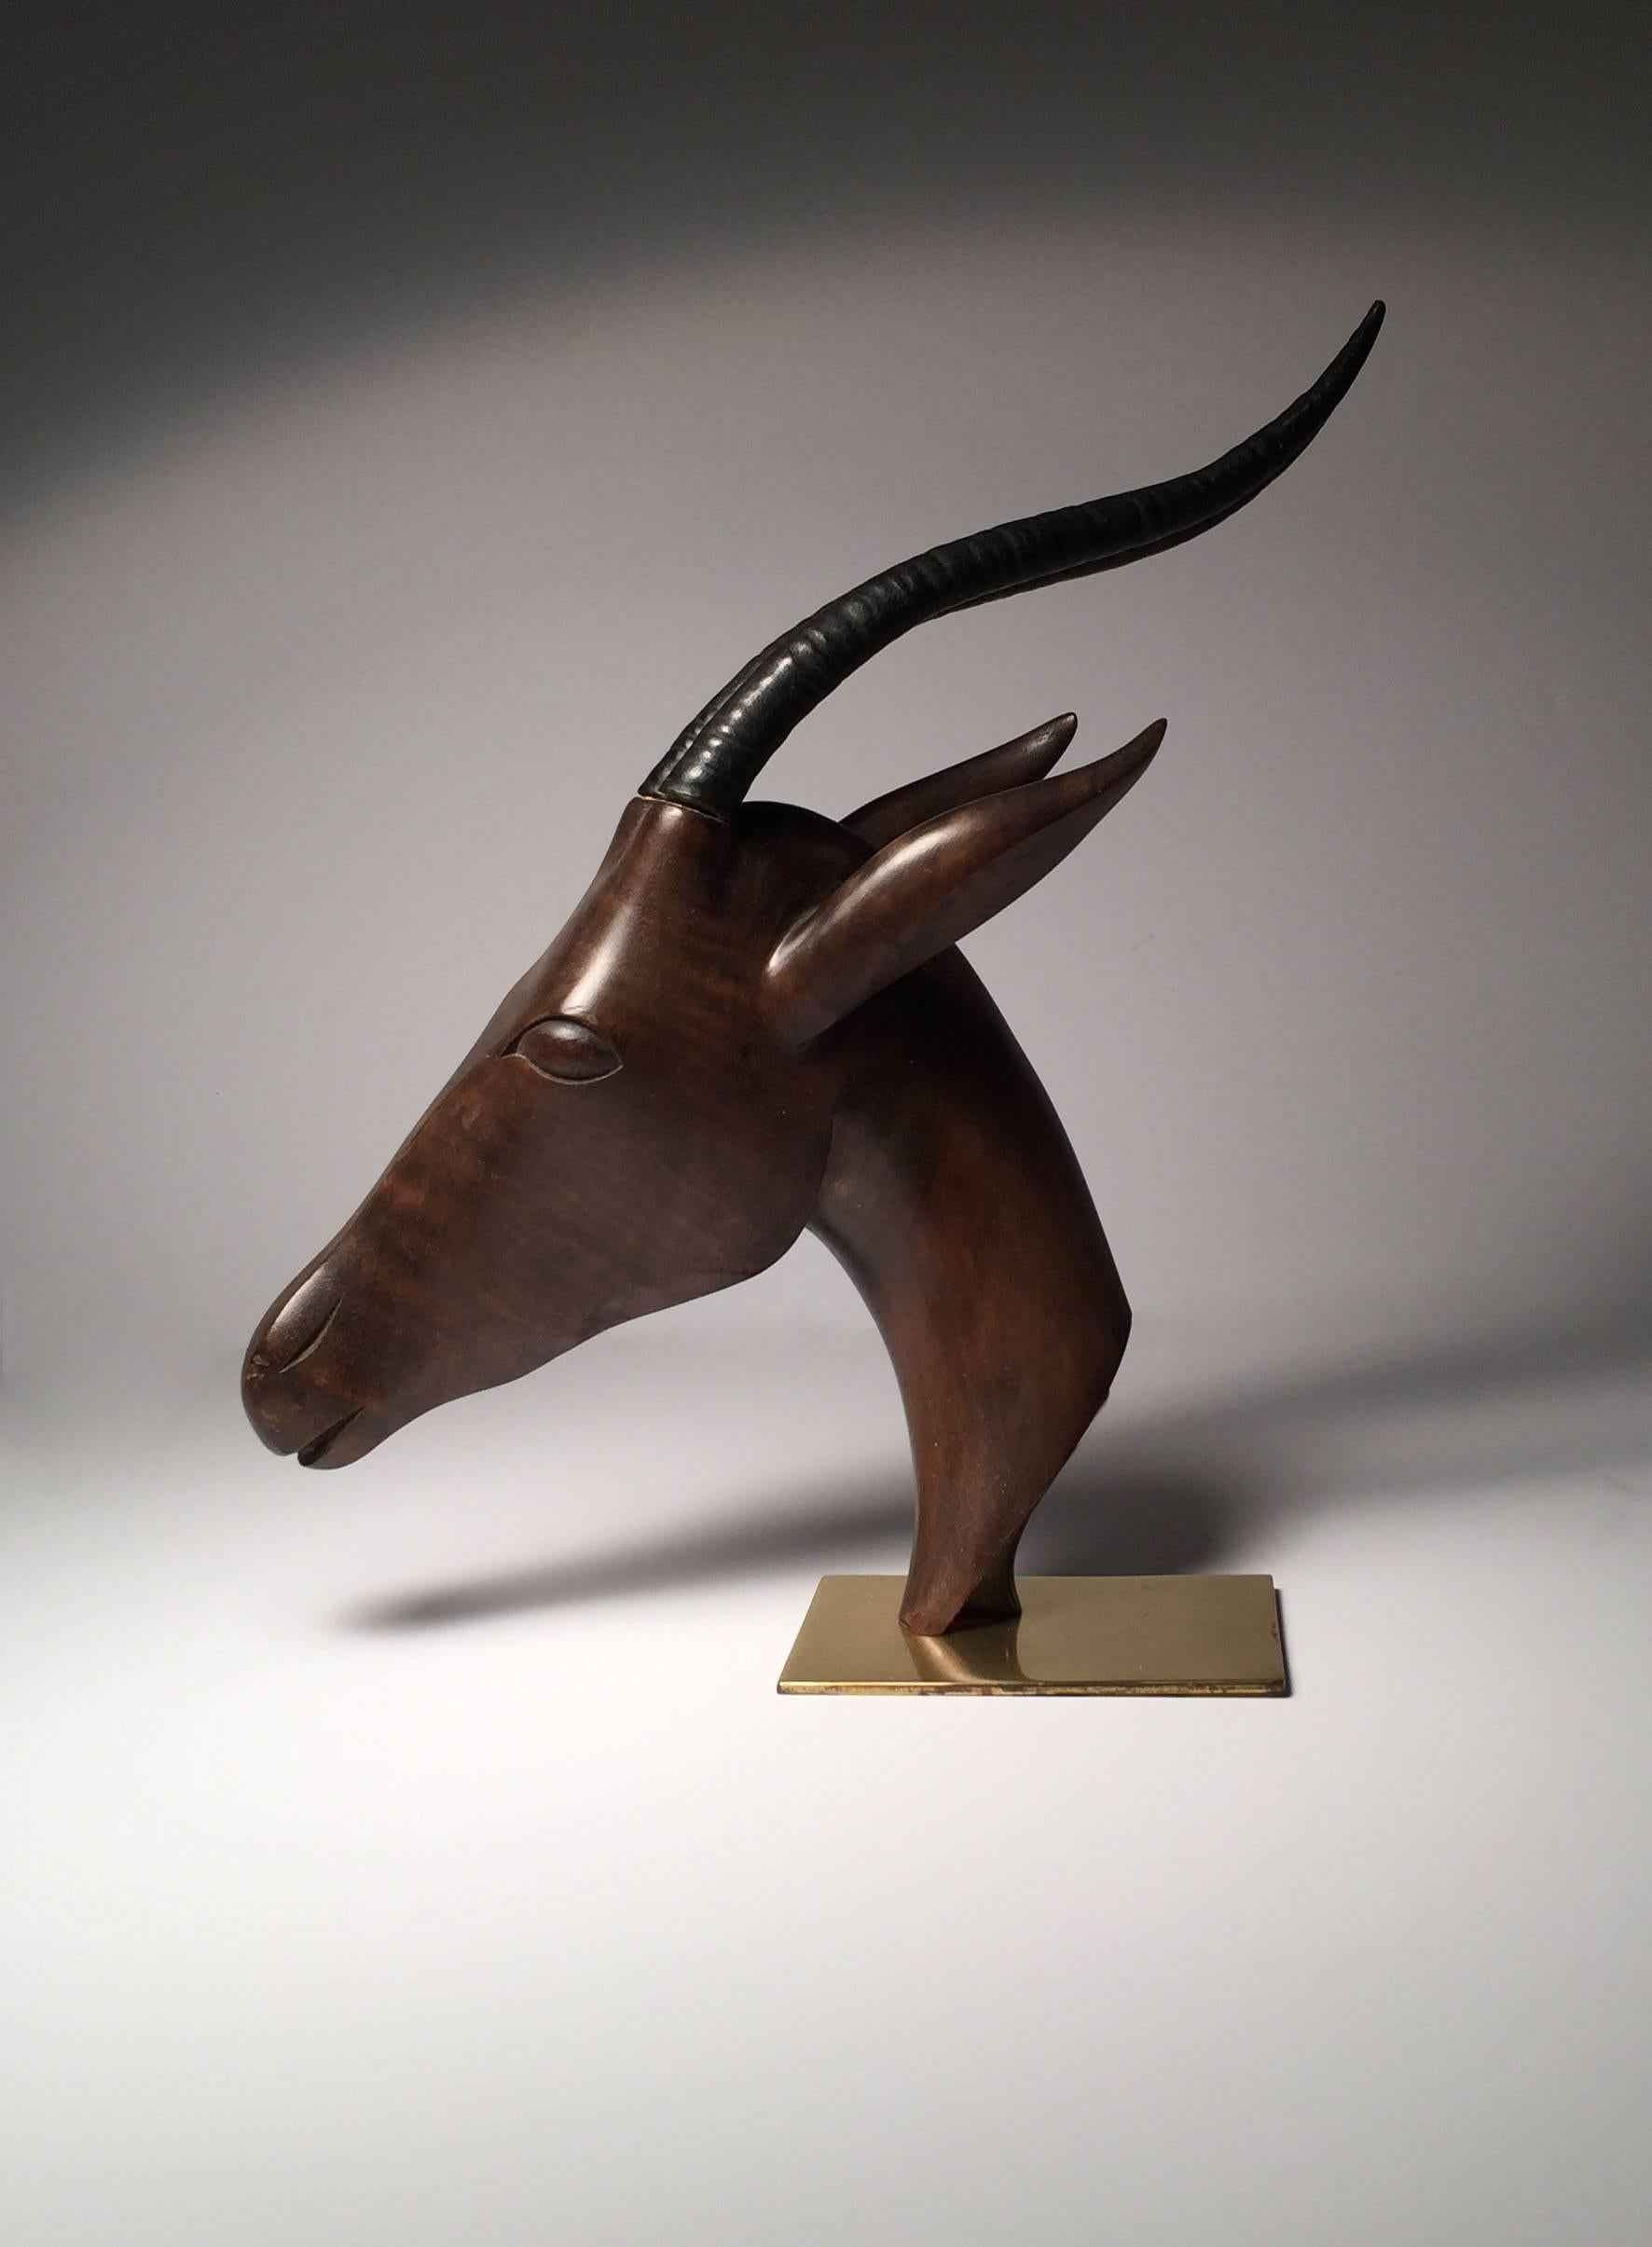 Large Hagenauer Gazelle (deer) wood and bronze sculpture
Beautifully designed brass base supporting an exotic wood form of a Gazelle.
Bronze horns attached to wood. A slight gap between where they mount and the wood. Not detracting in my opinion.